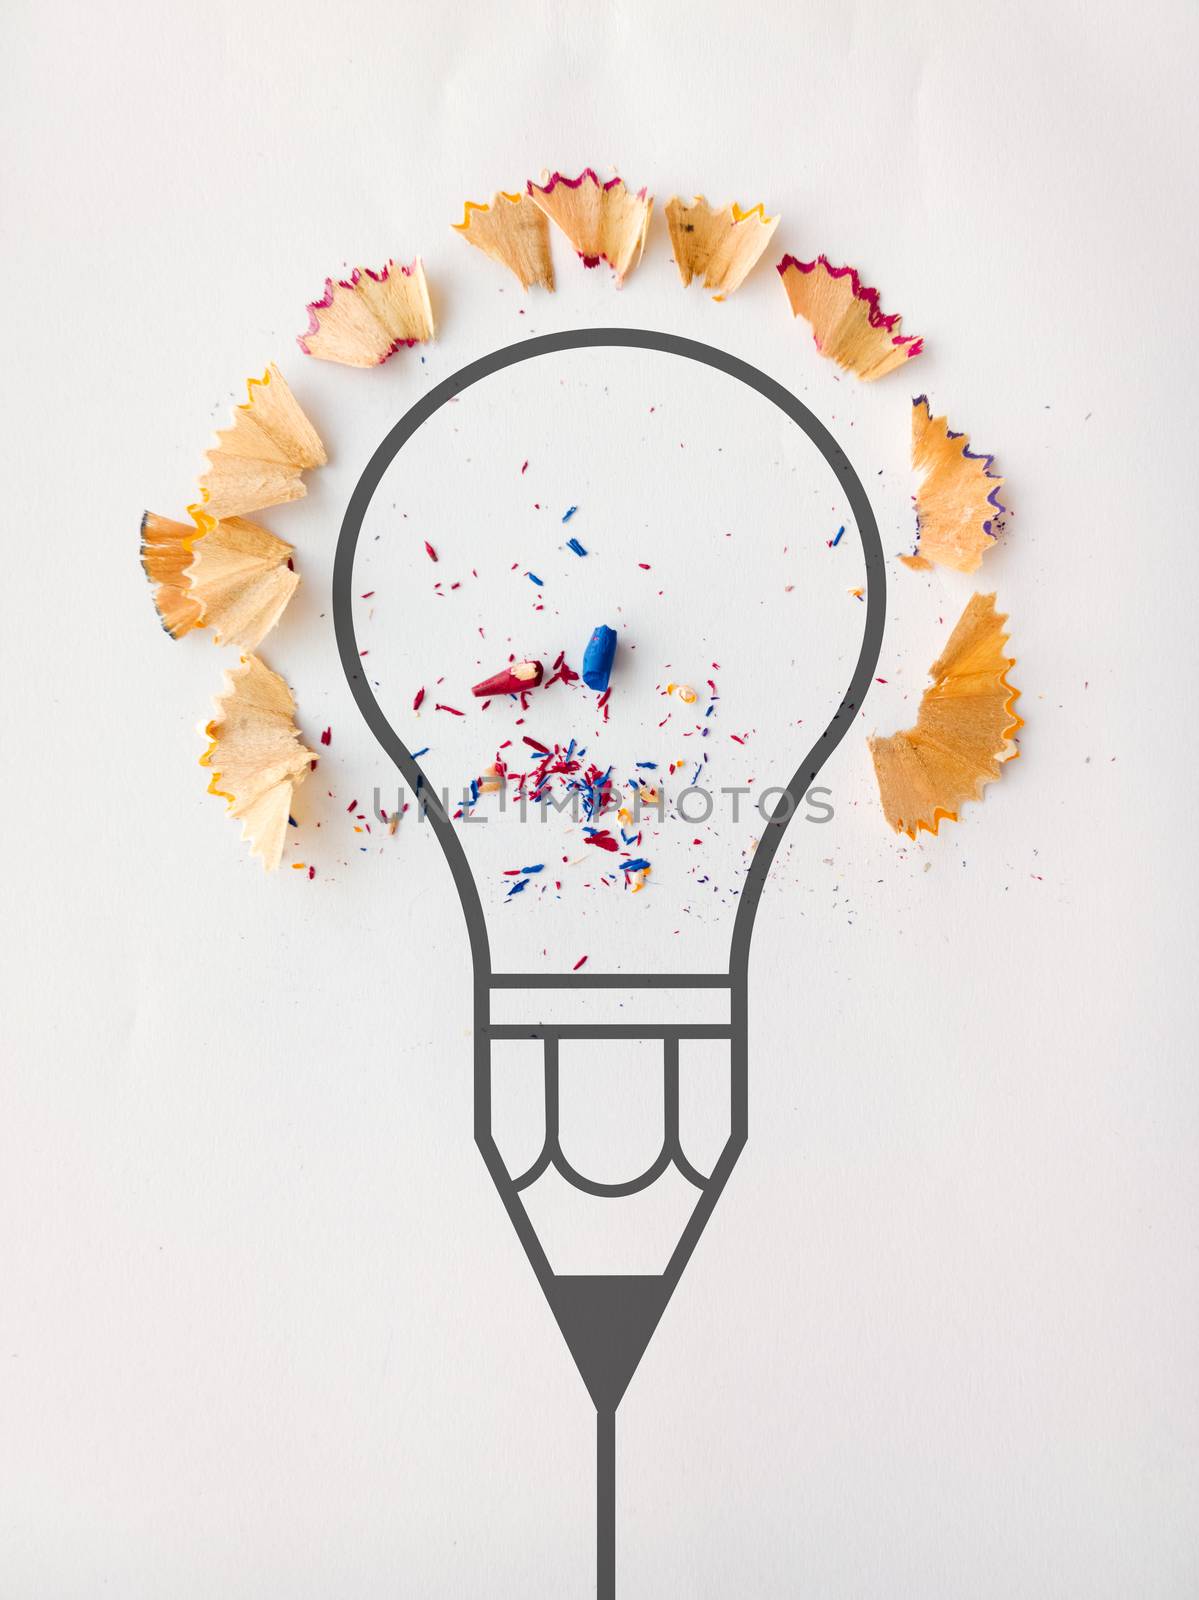 graphic pencil  light bulb with pencil saw dust on paper backgro by everythingpossible